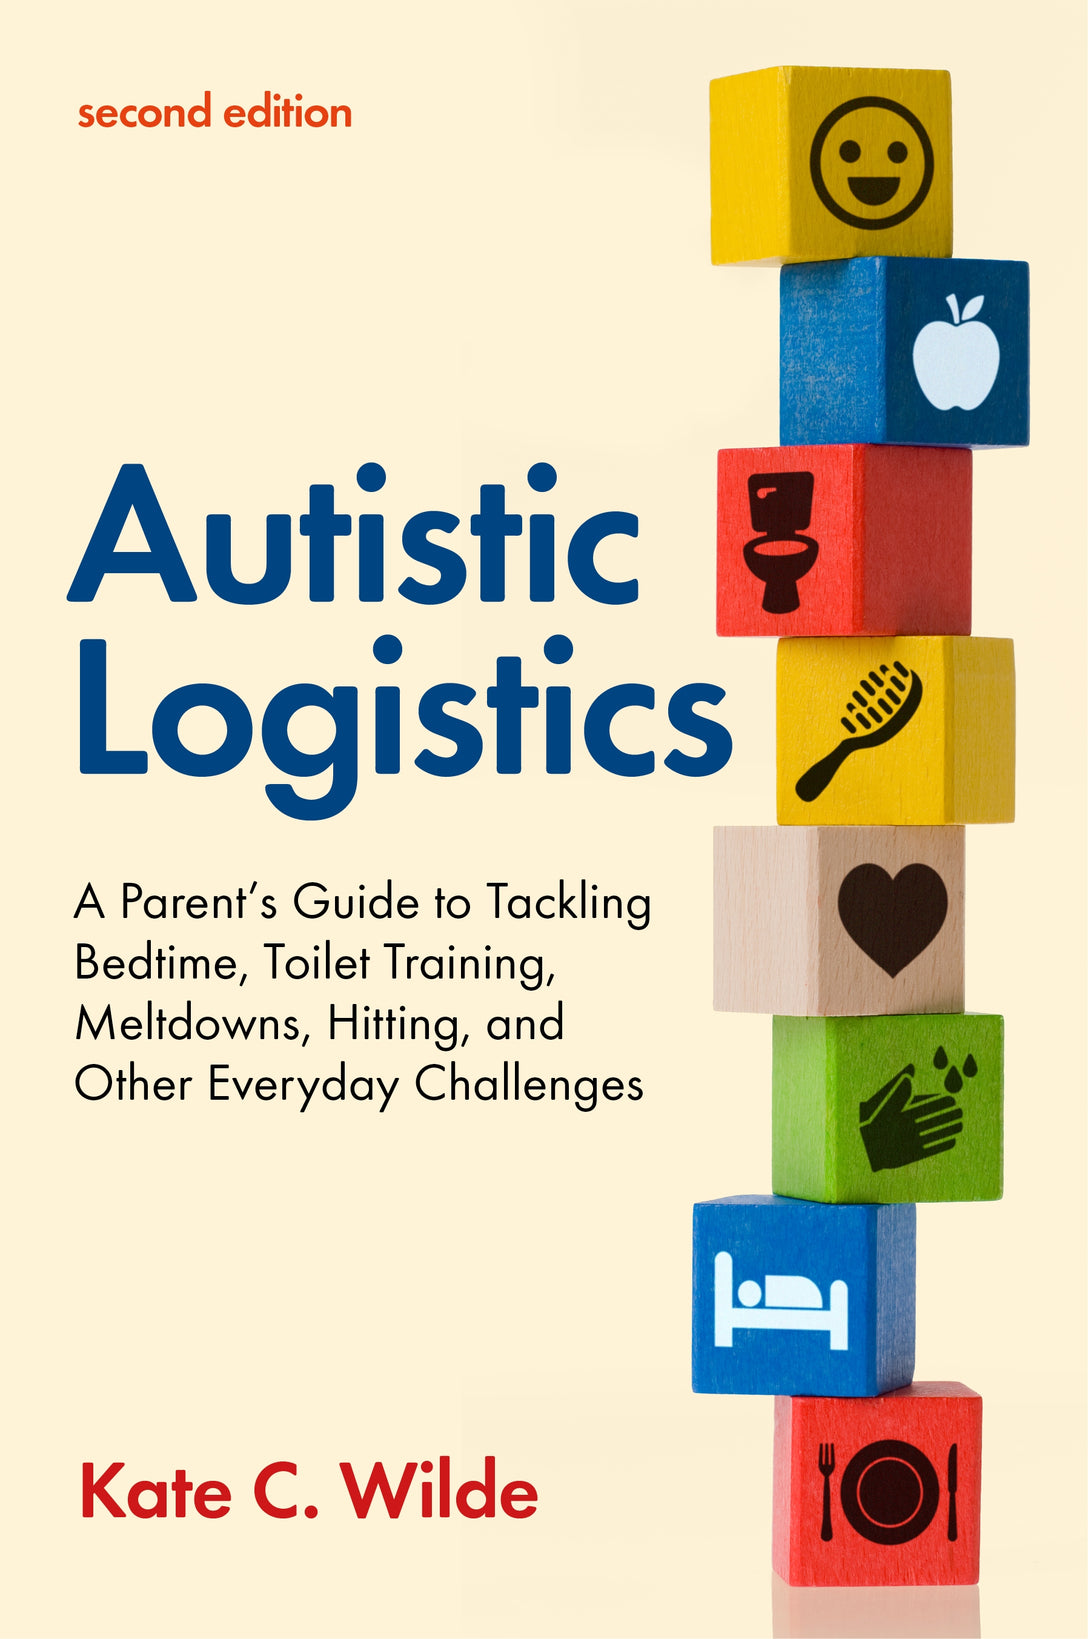 Autistic Logistics, Second Edition by Kate Wilde